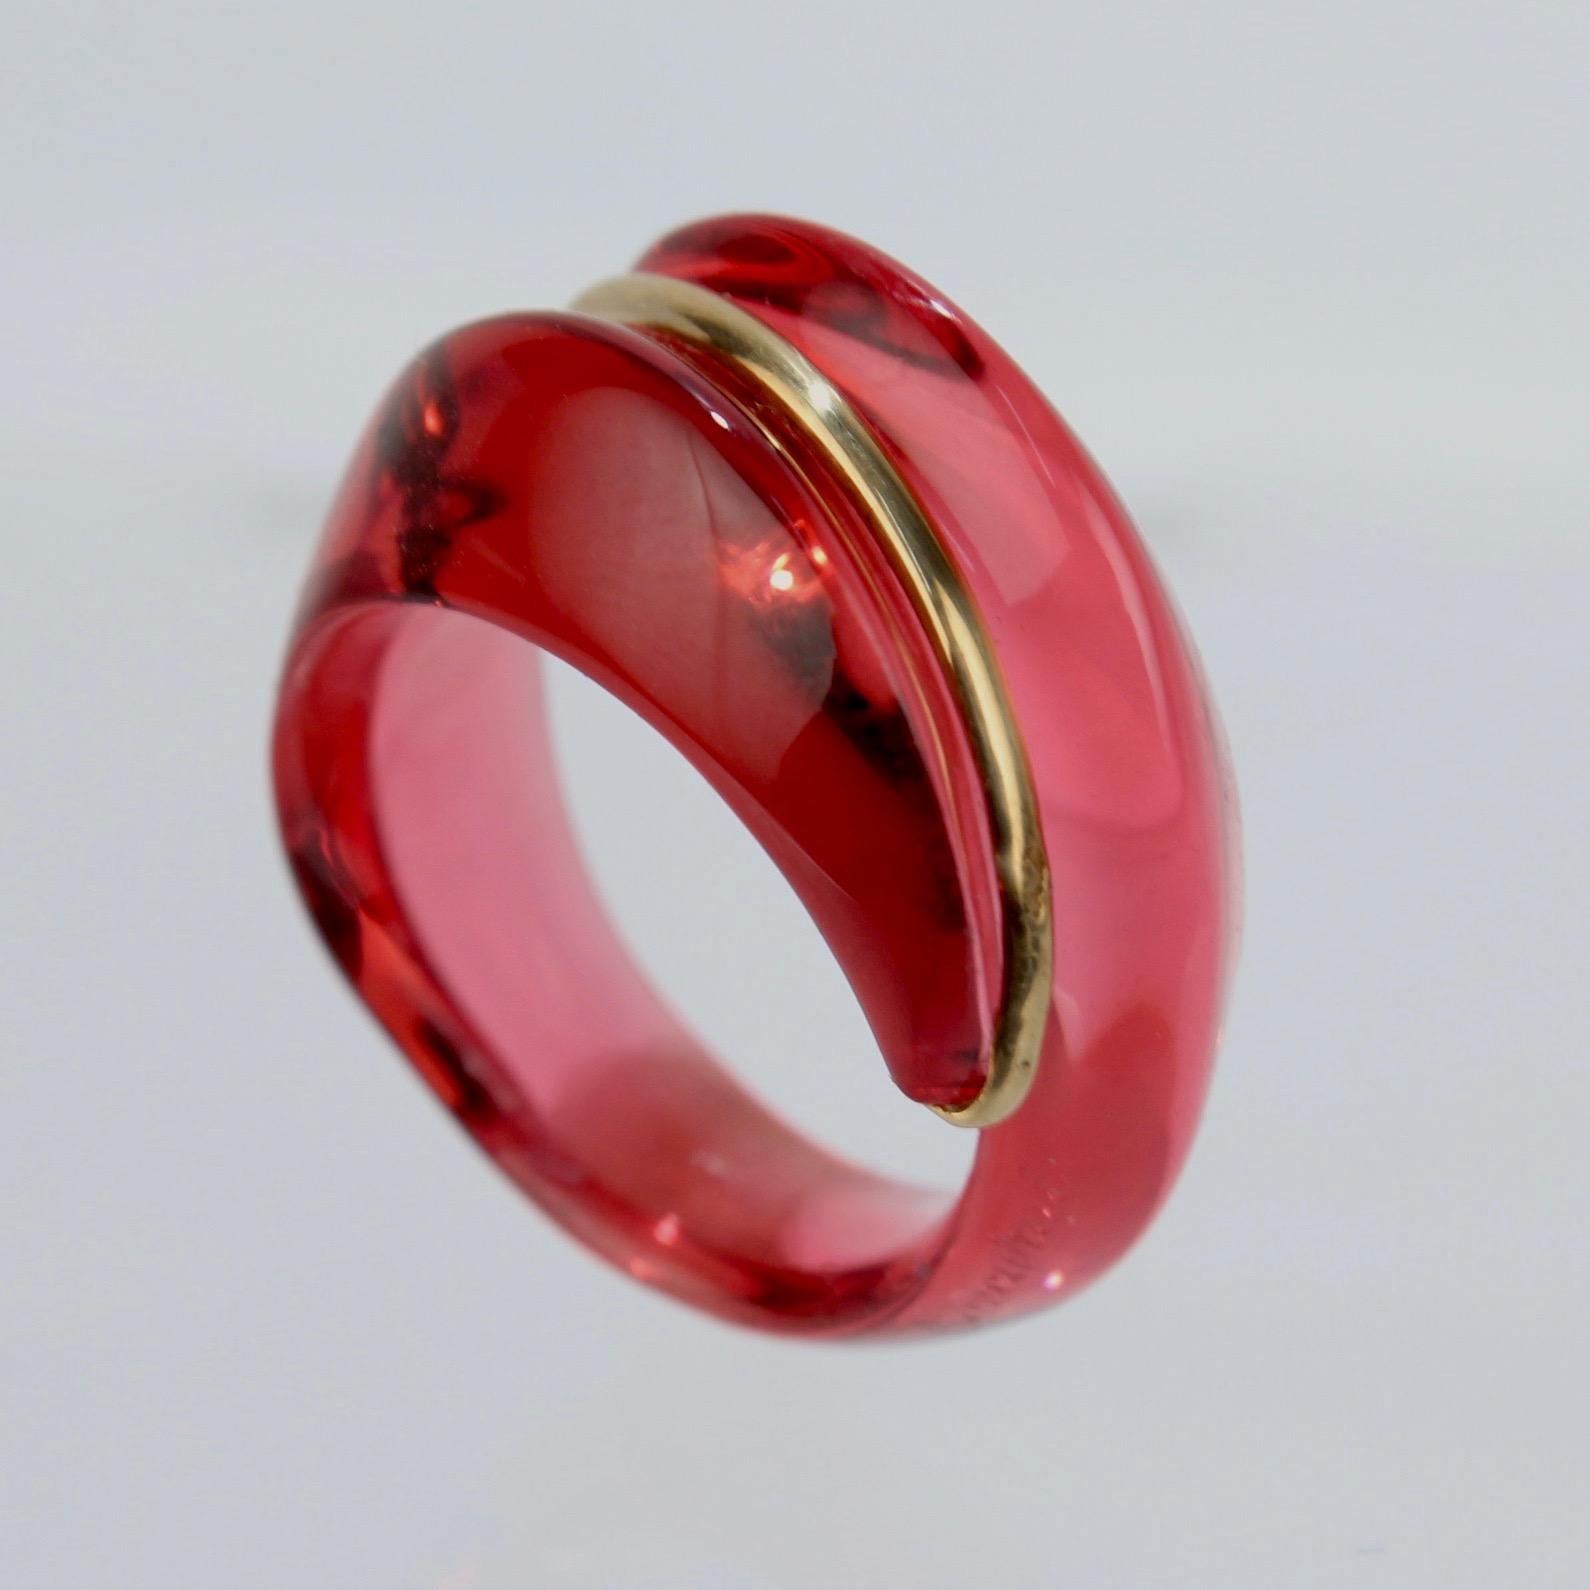 A wonderful Baccarat Coquillage ring.

In ruby red glass and 18k gold.

Great modernist jewelry design from France's premier glass house!

Marked with an acid-etched Baccarat factory mark, a French assay mark, and 750 for 18k gold fineness.

Ring